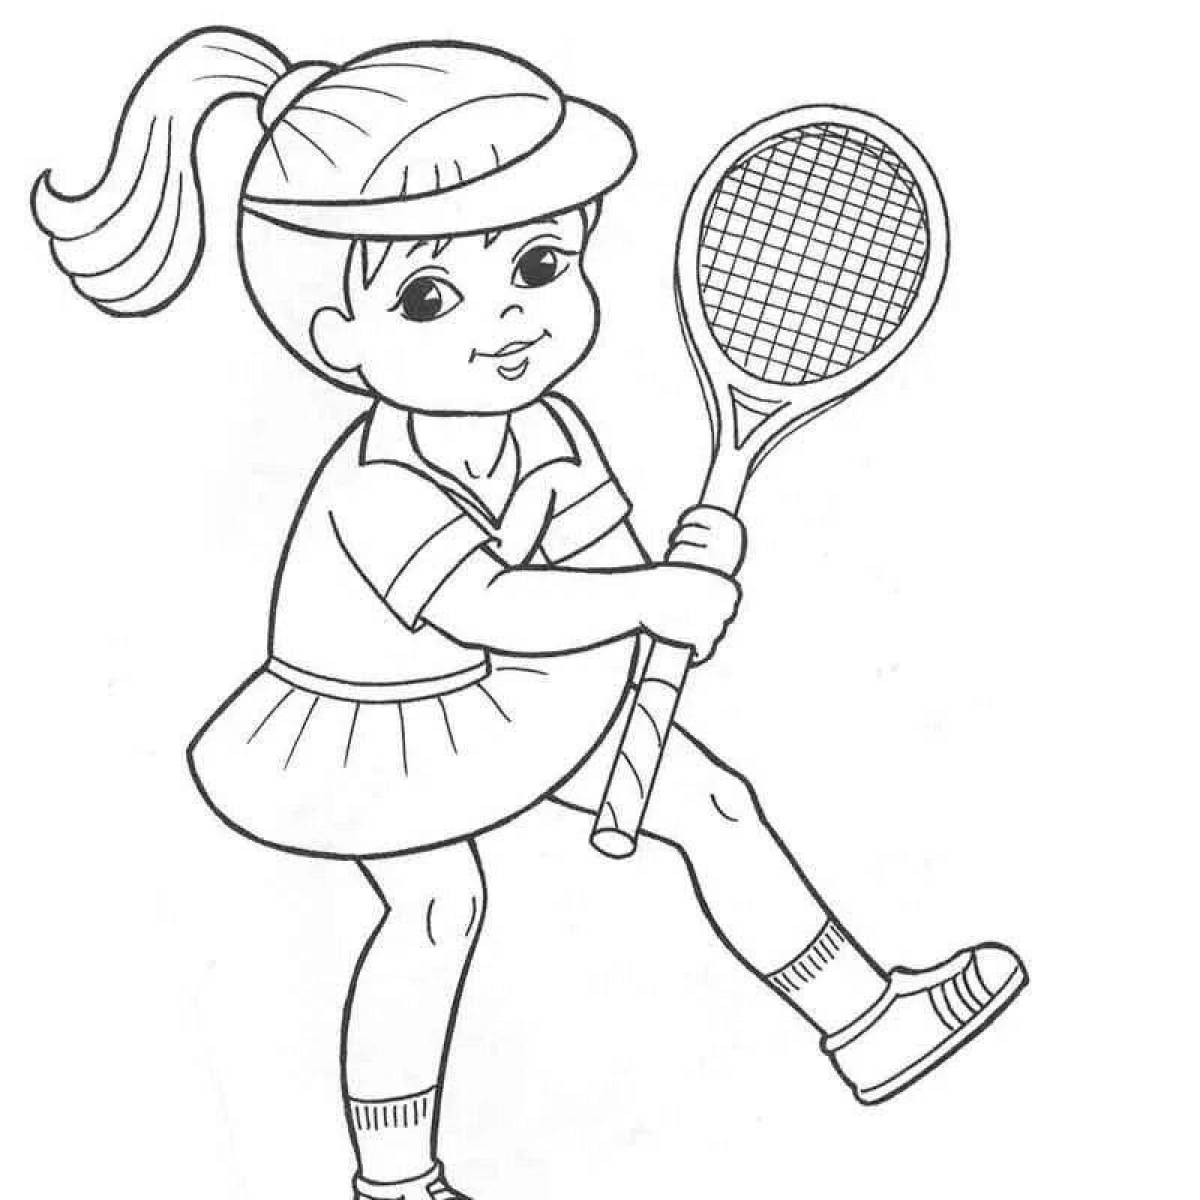 Coloring pages for confident sportsmen